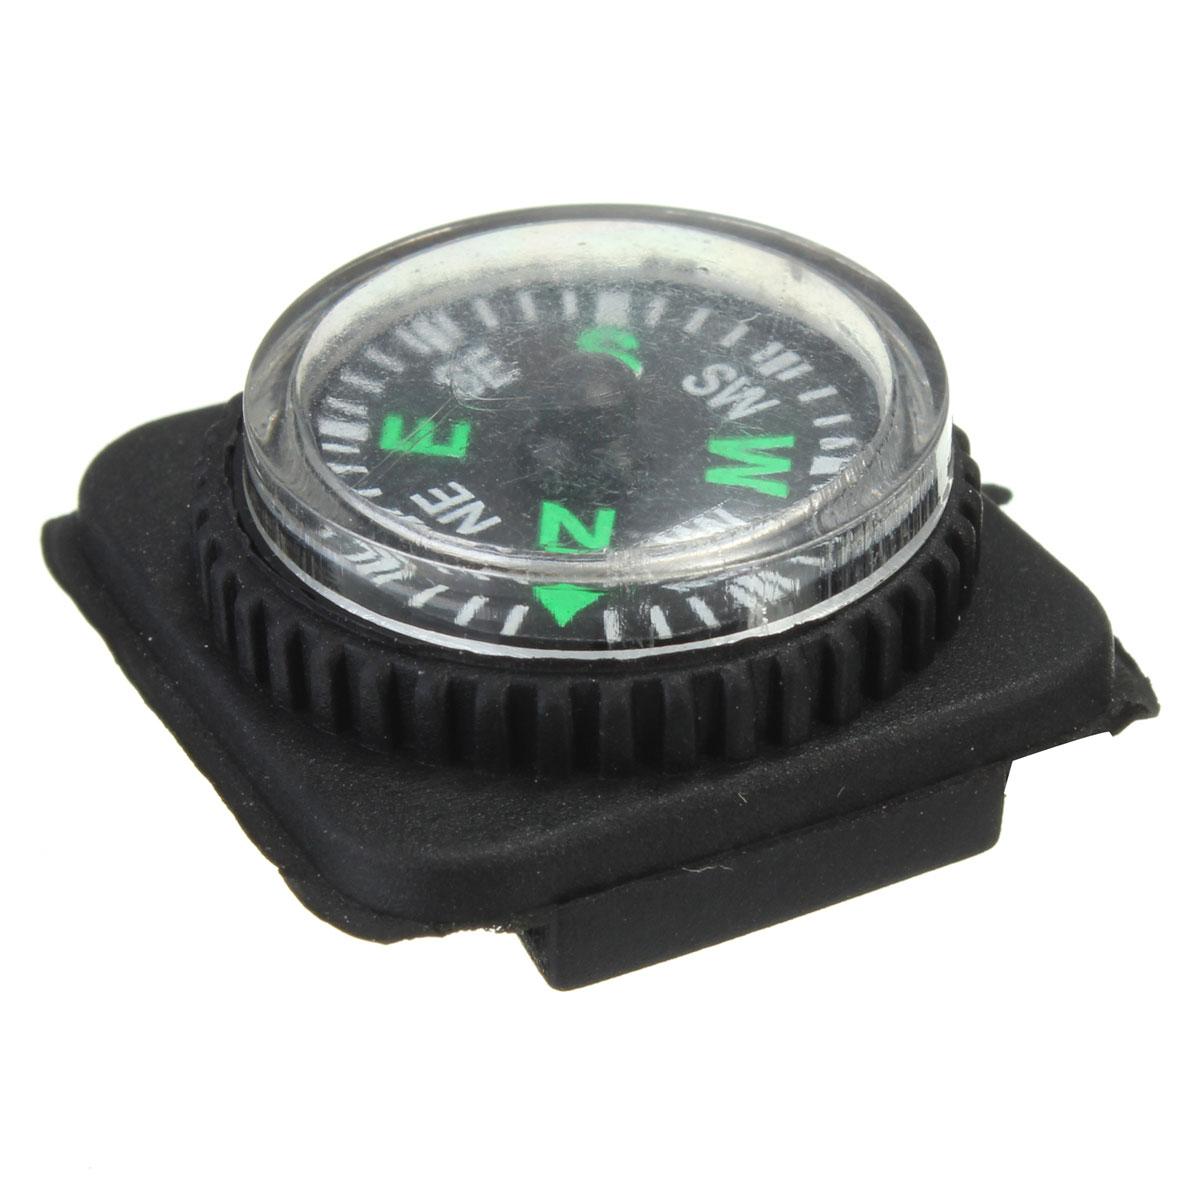 IPReetrade-Mini-EDC-Compass-For-Paracord-Bracelet-Outdoor-Camping-Emergency-Survival-Tool-1173859